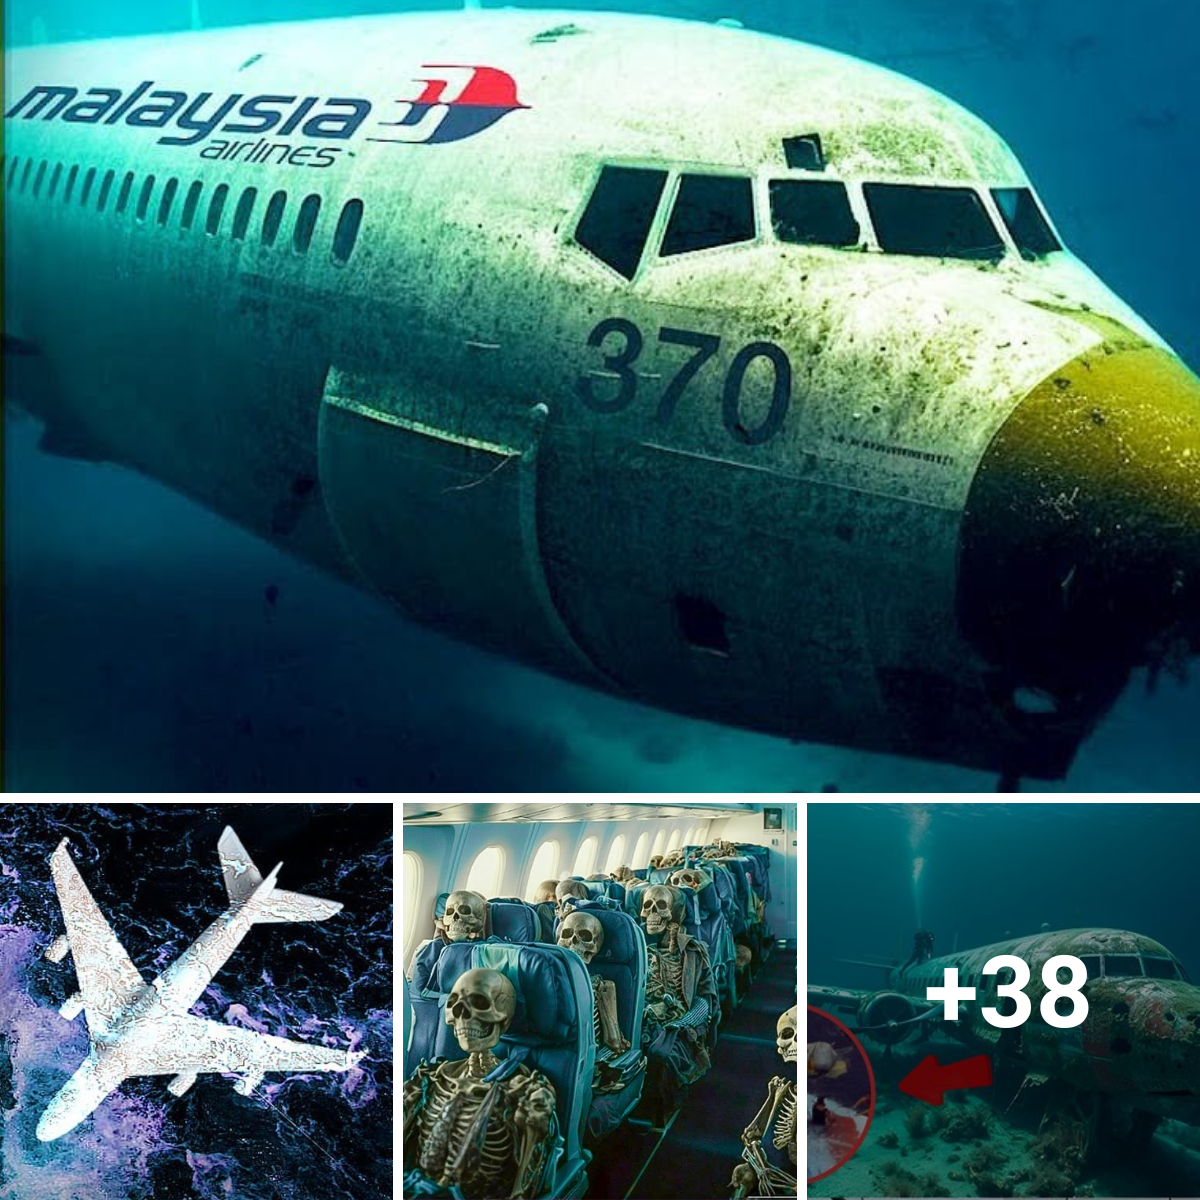 Breaking: Scientists’ Unexpected Finding May Provide an Answer to the Mysteries of Malaysian Flight 370.(video).